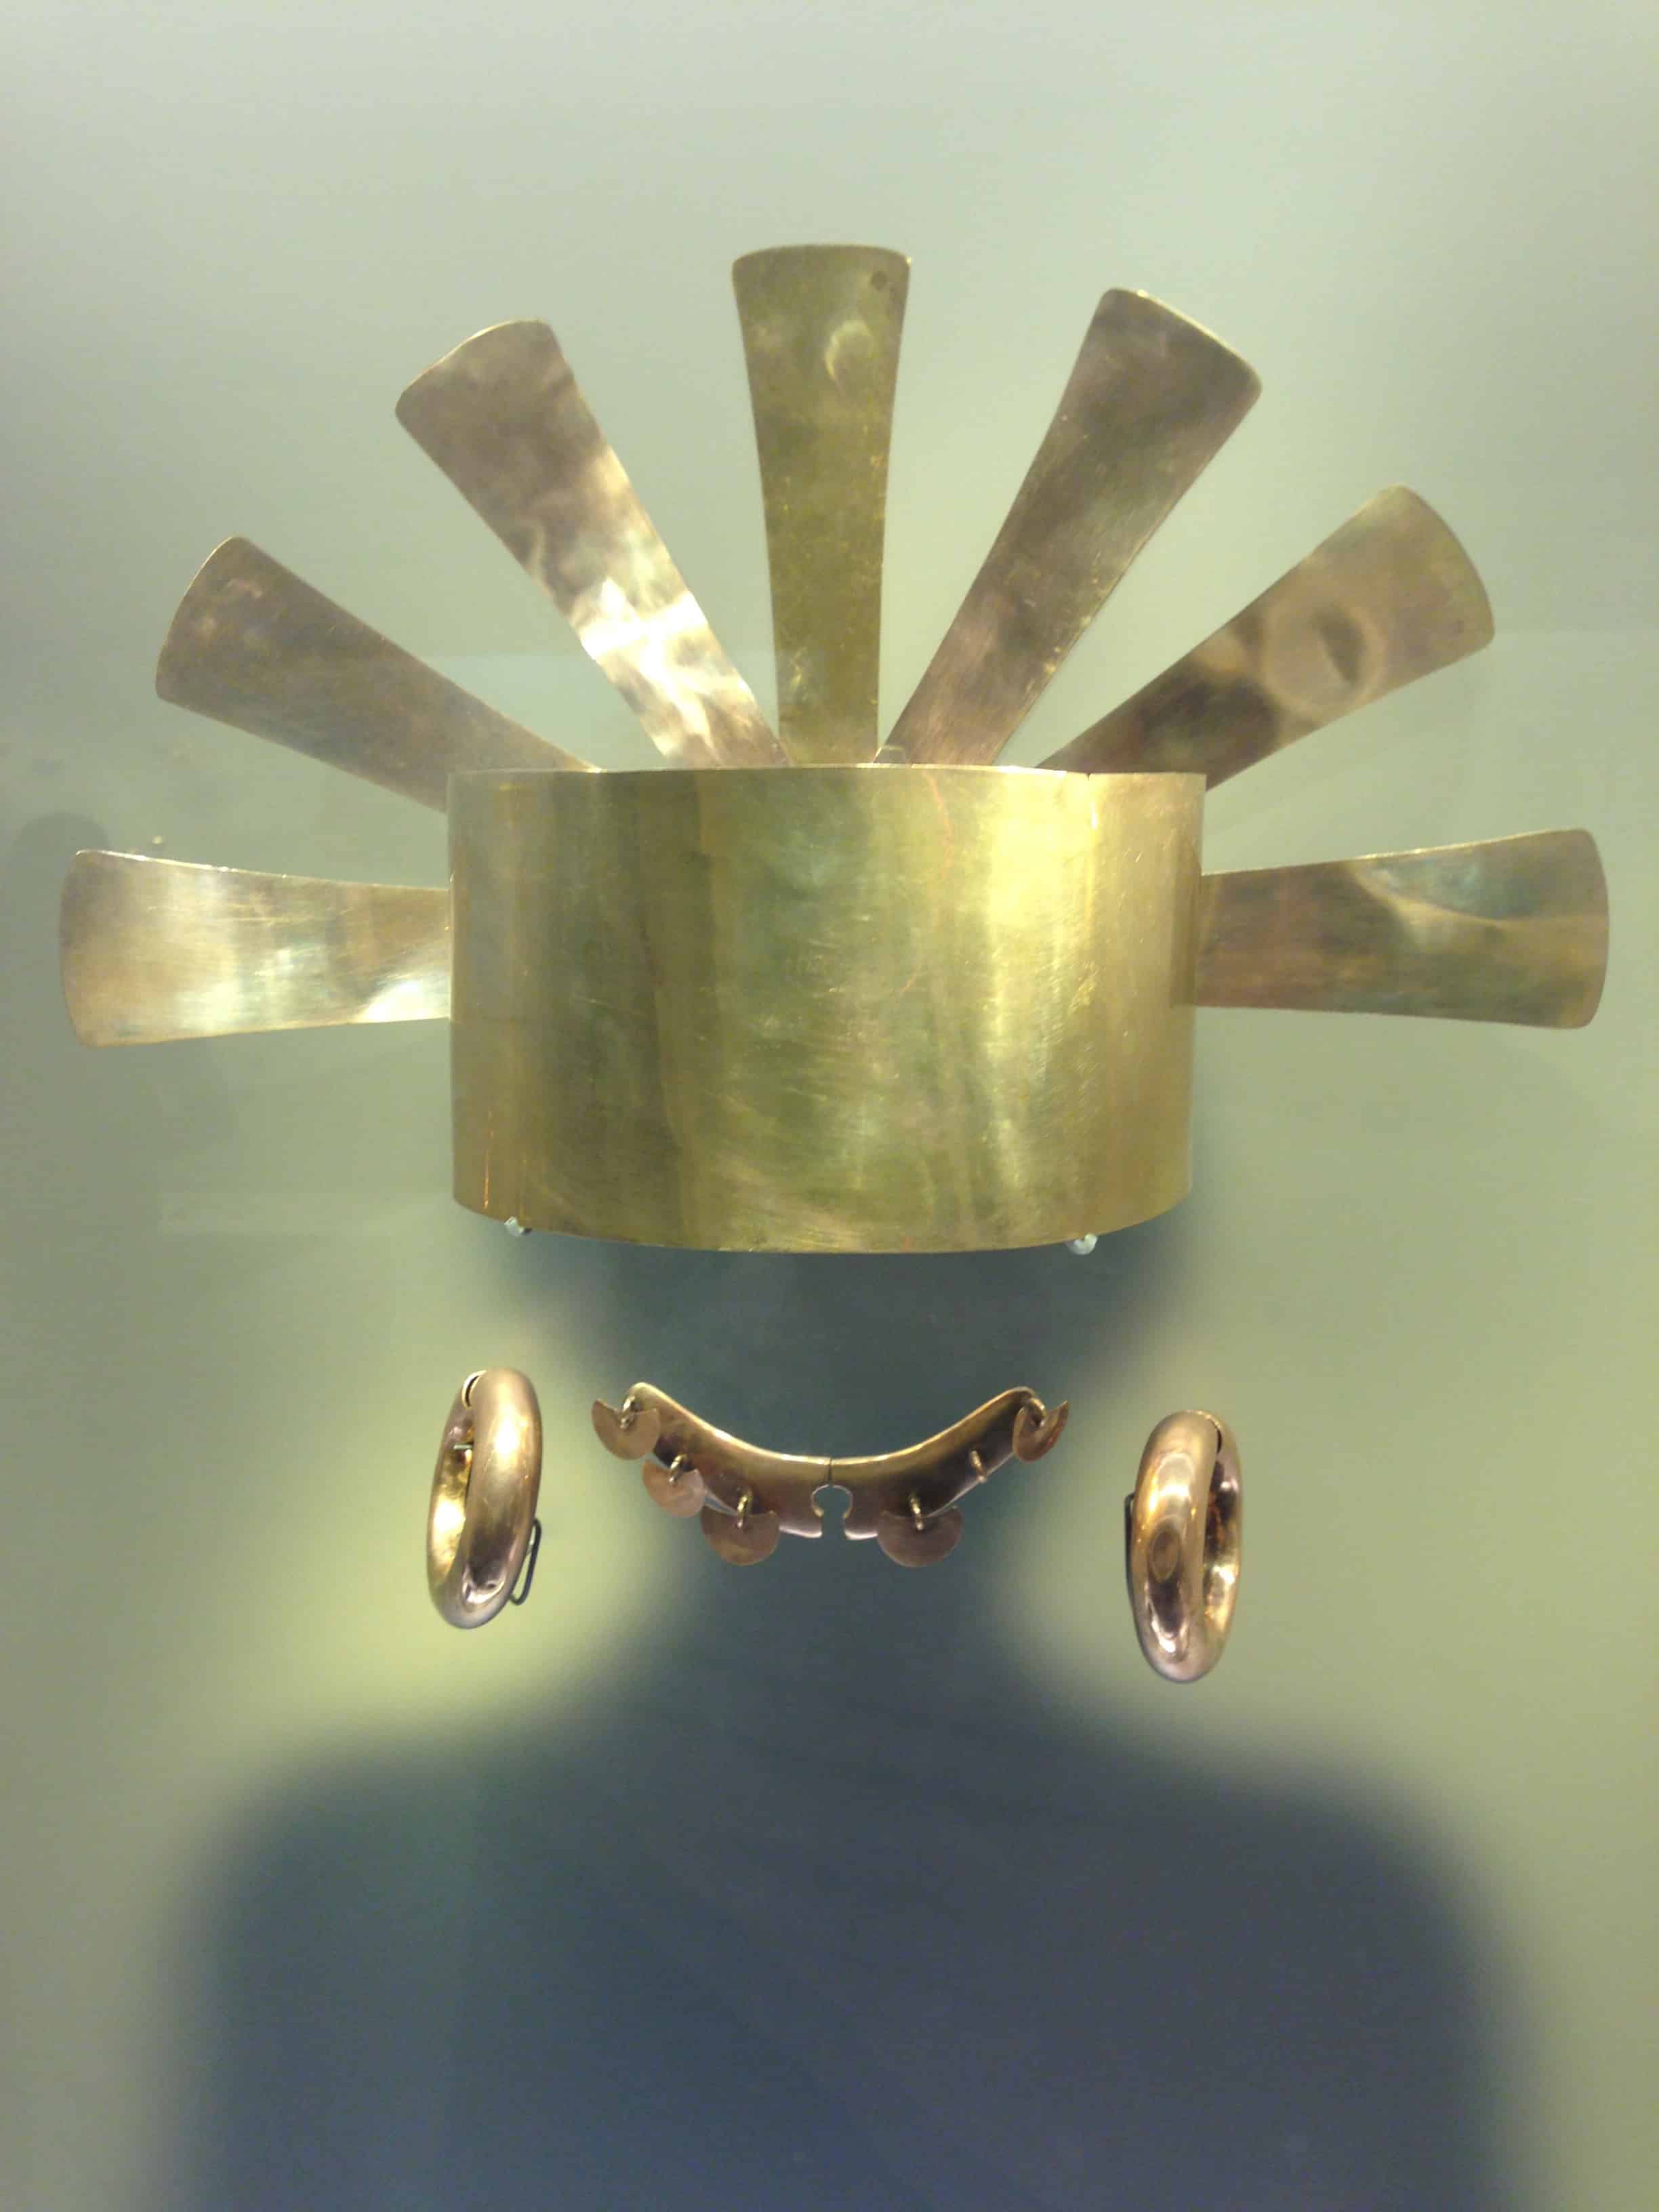 Golden crown, nose, and earrings at the Gold Museum in Bogotá, Colombia